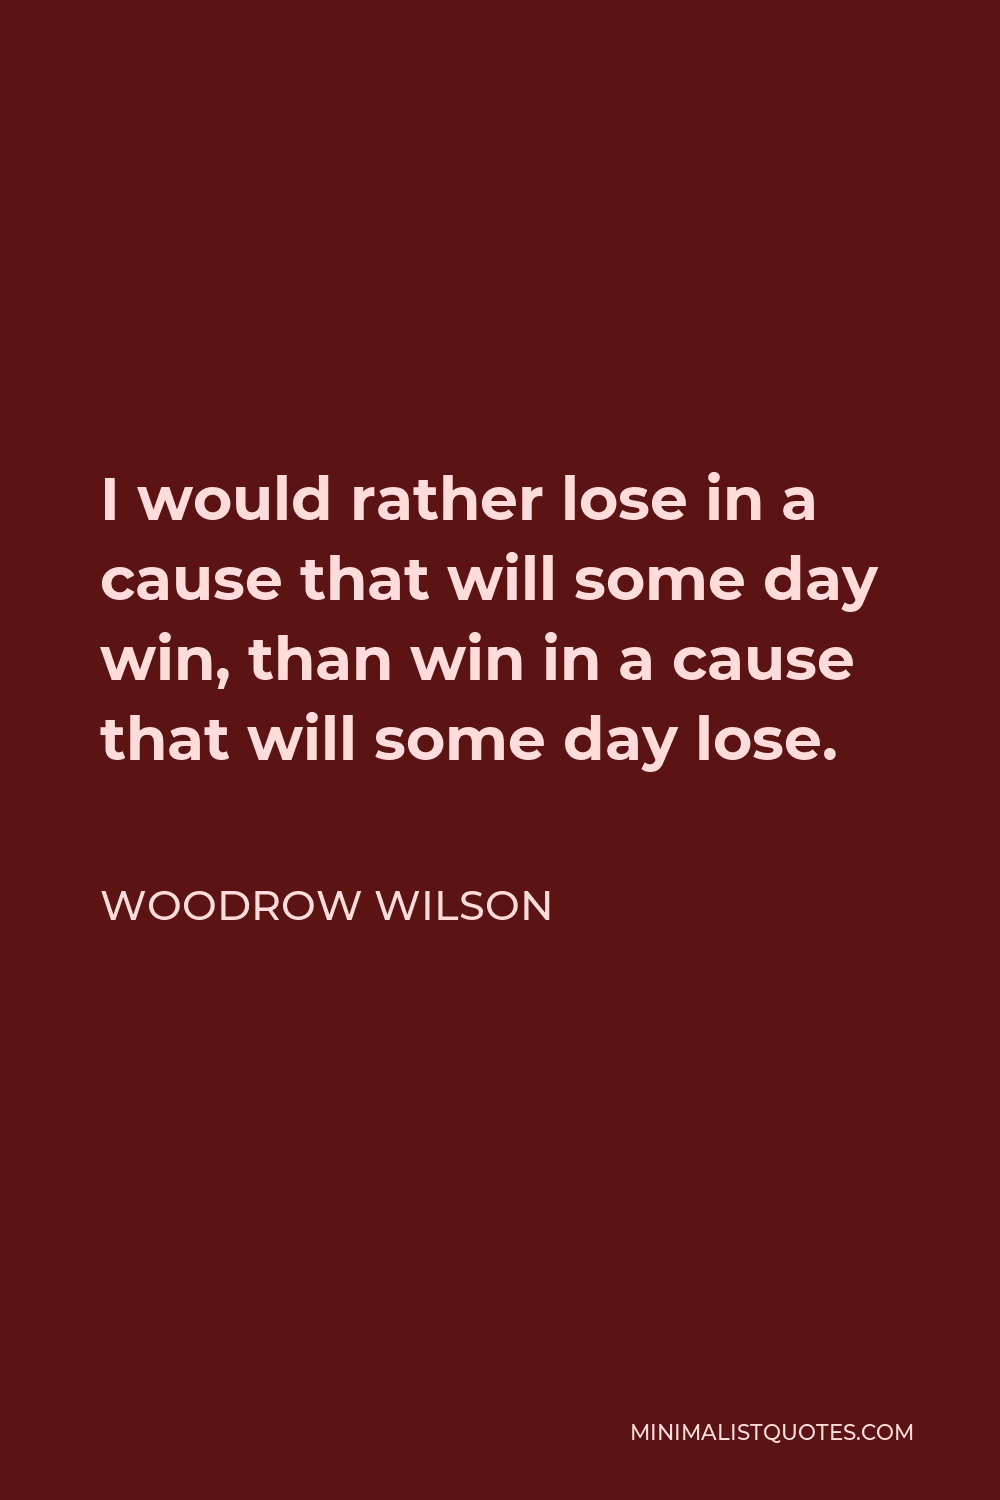 Woodrow Wilson Quote - I would rather lose in a cause that will some day win, than win in a cause that will some day lose.